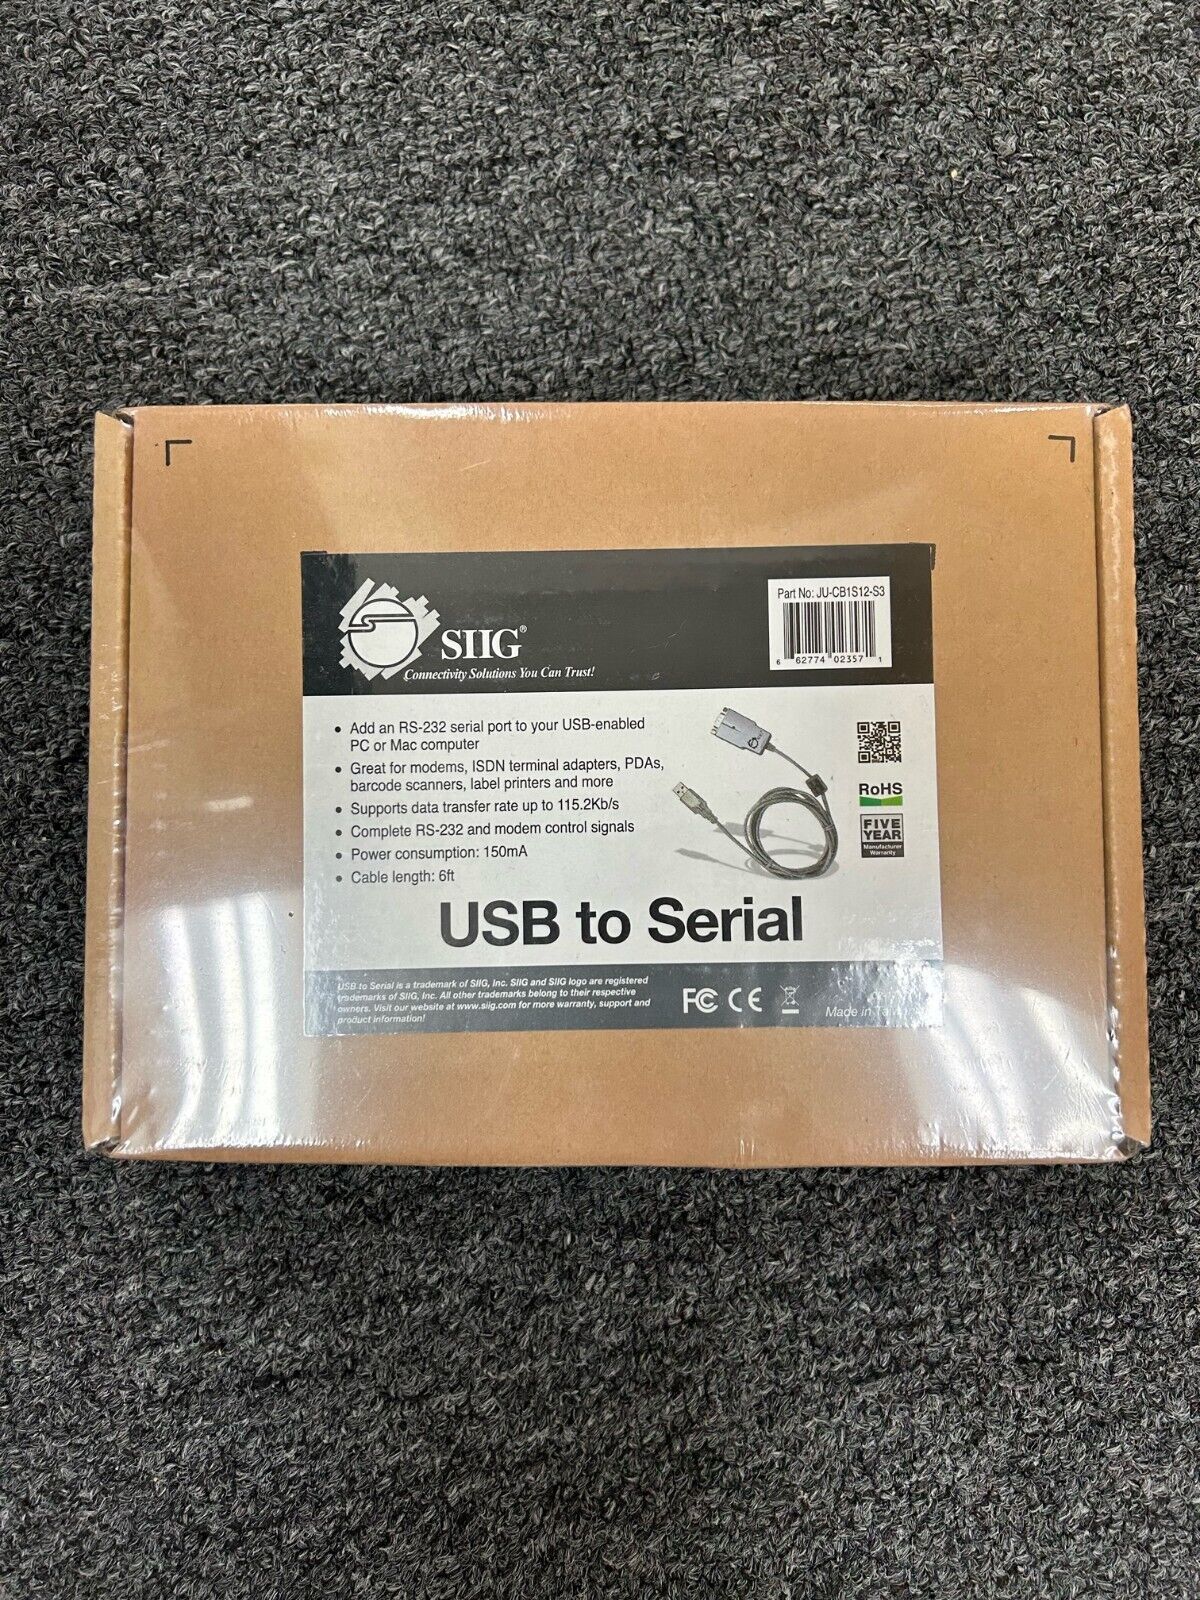 SIIG USB TO SERIAL cable, new